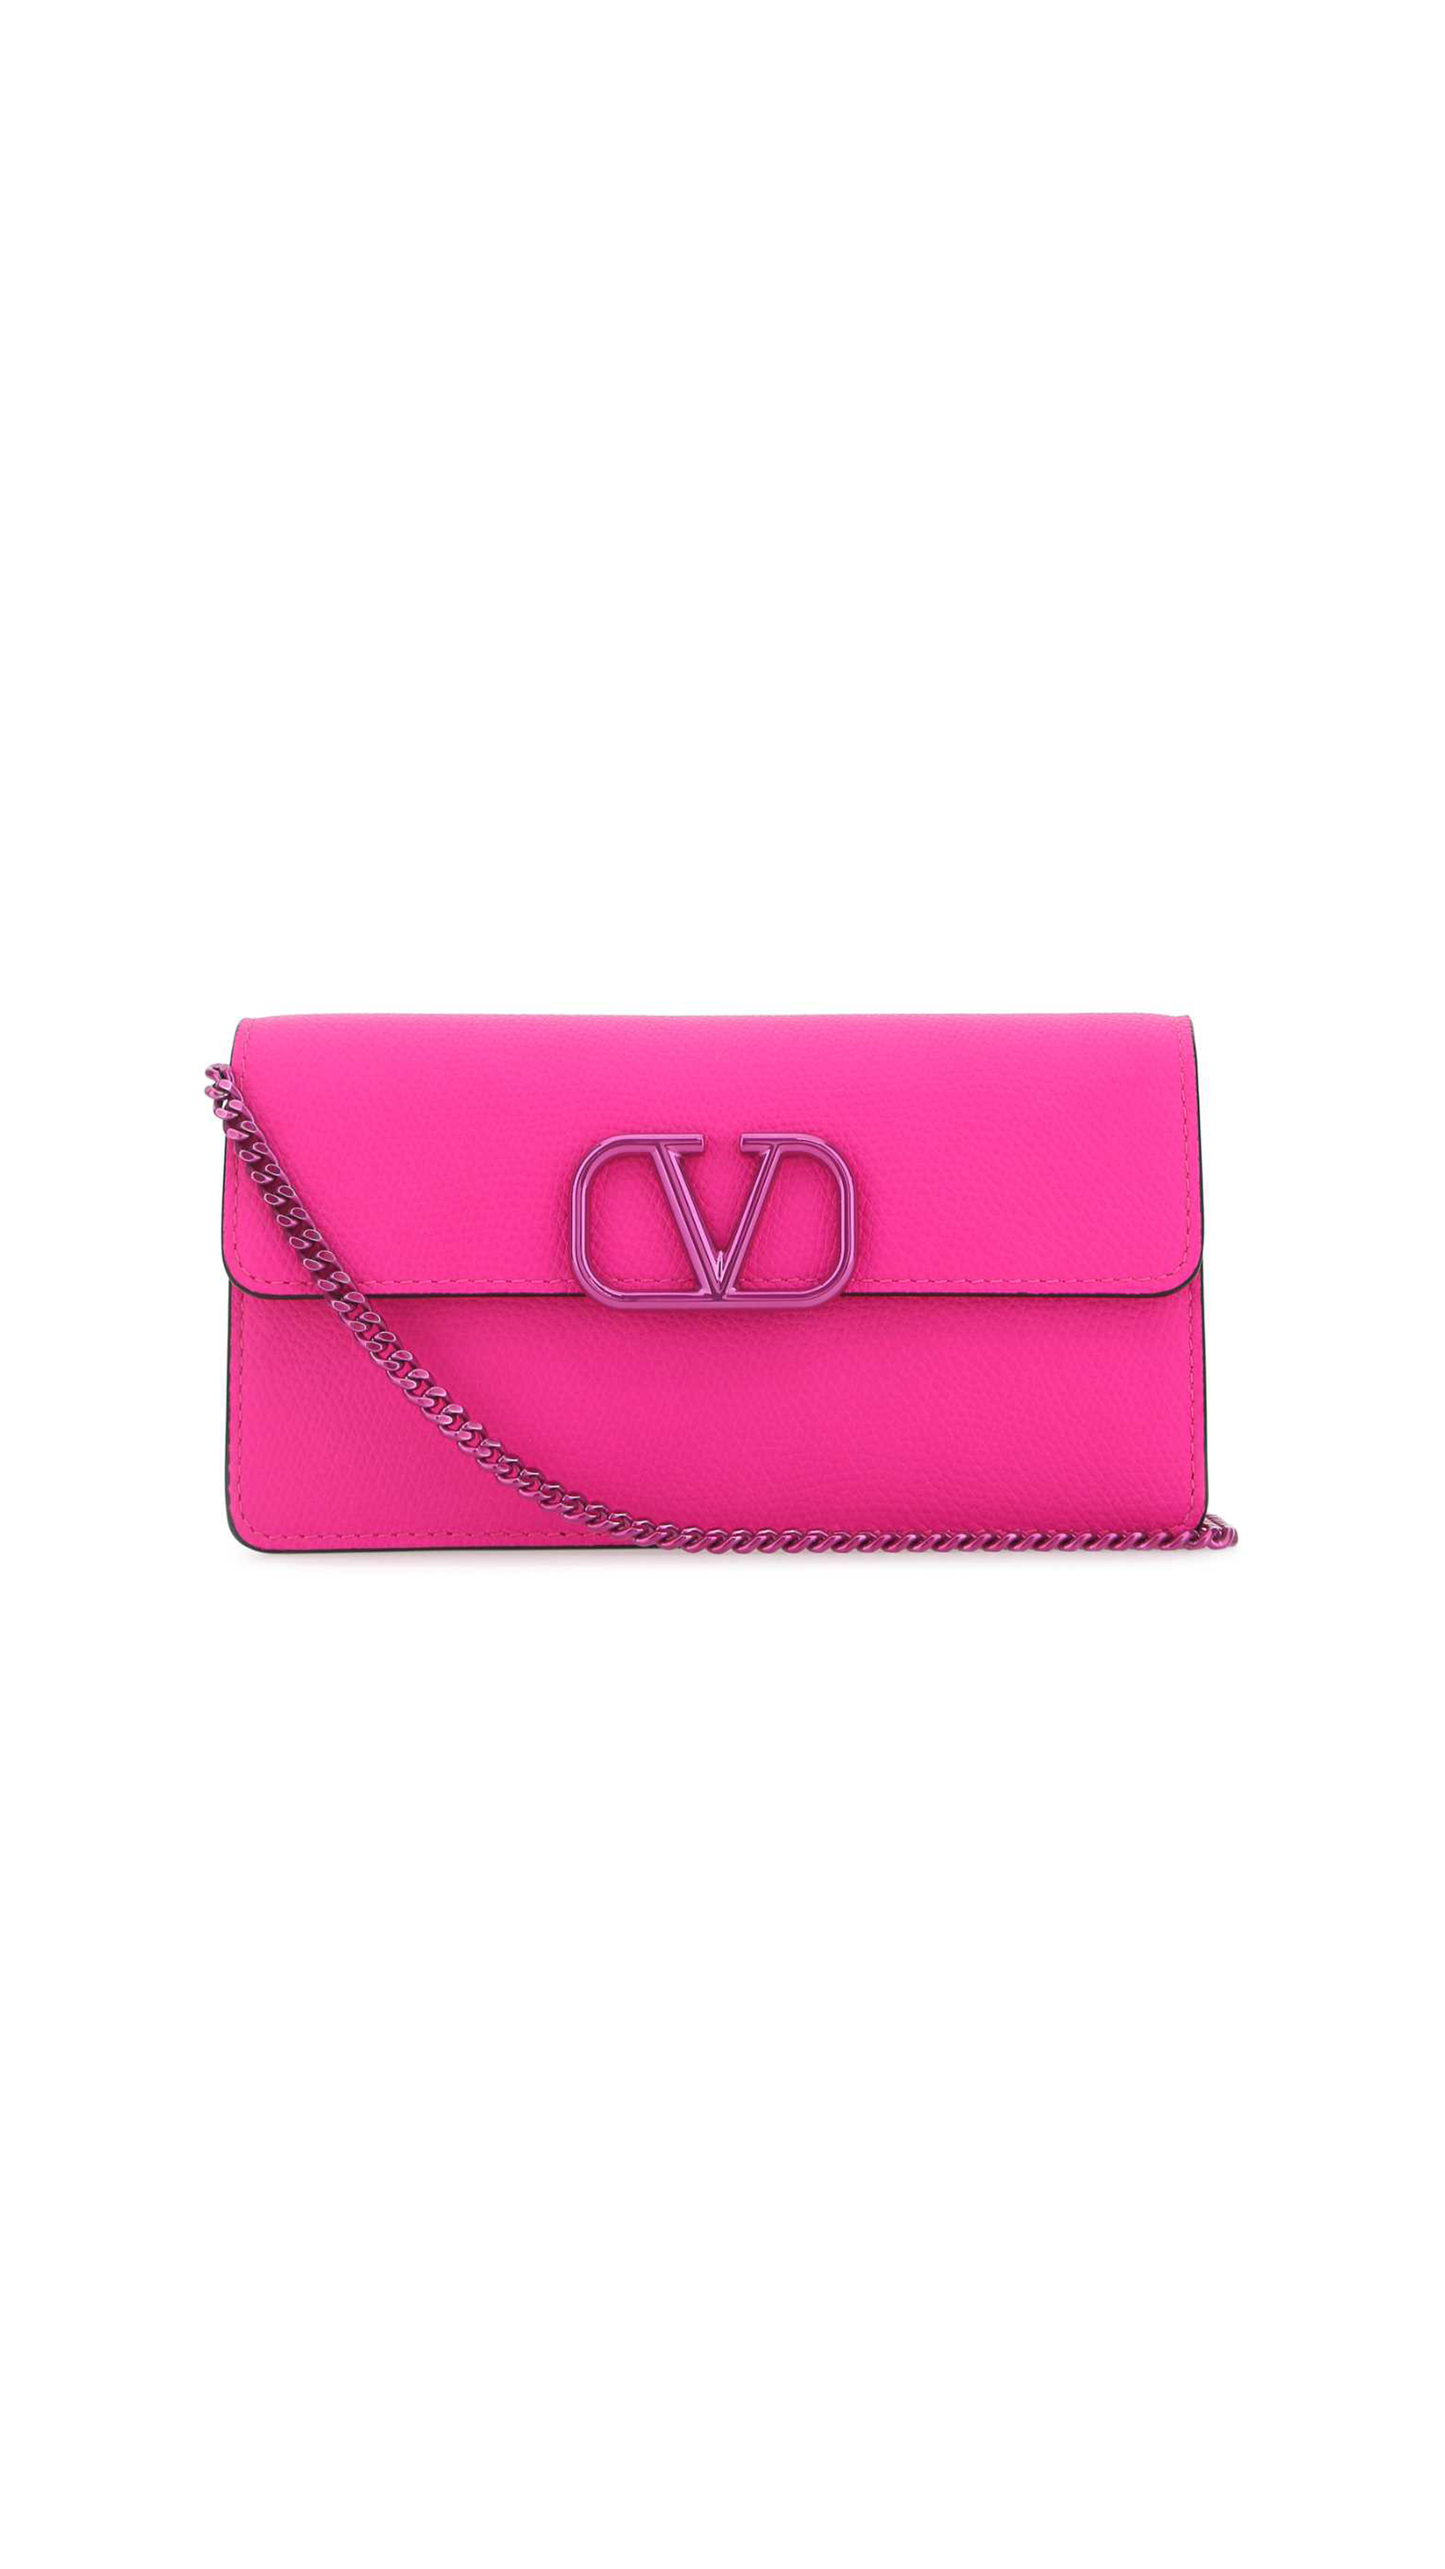 Vlogo Signature Grainy Calfskin Wallet with Chain - Pink PP.